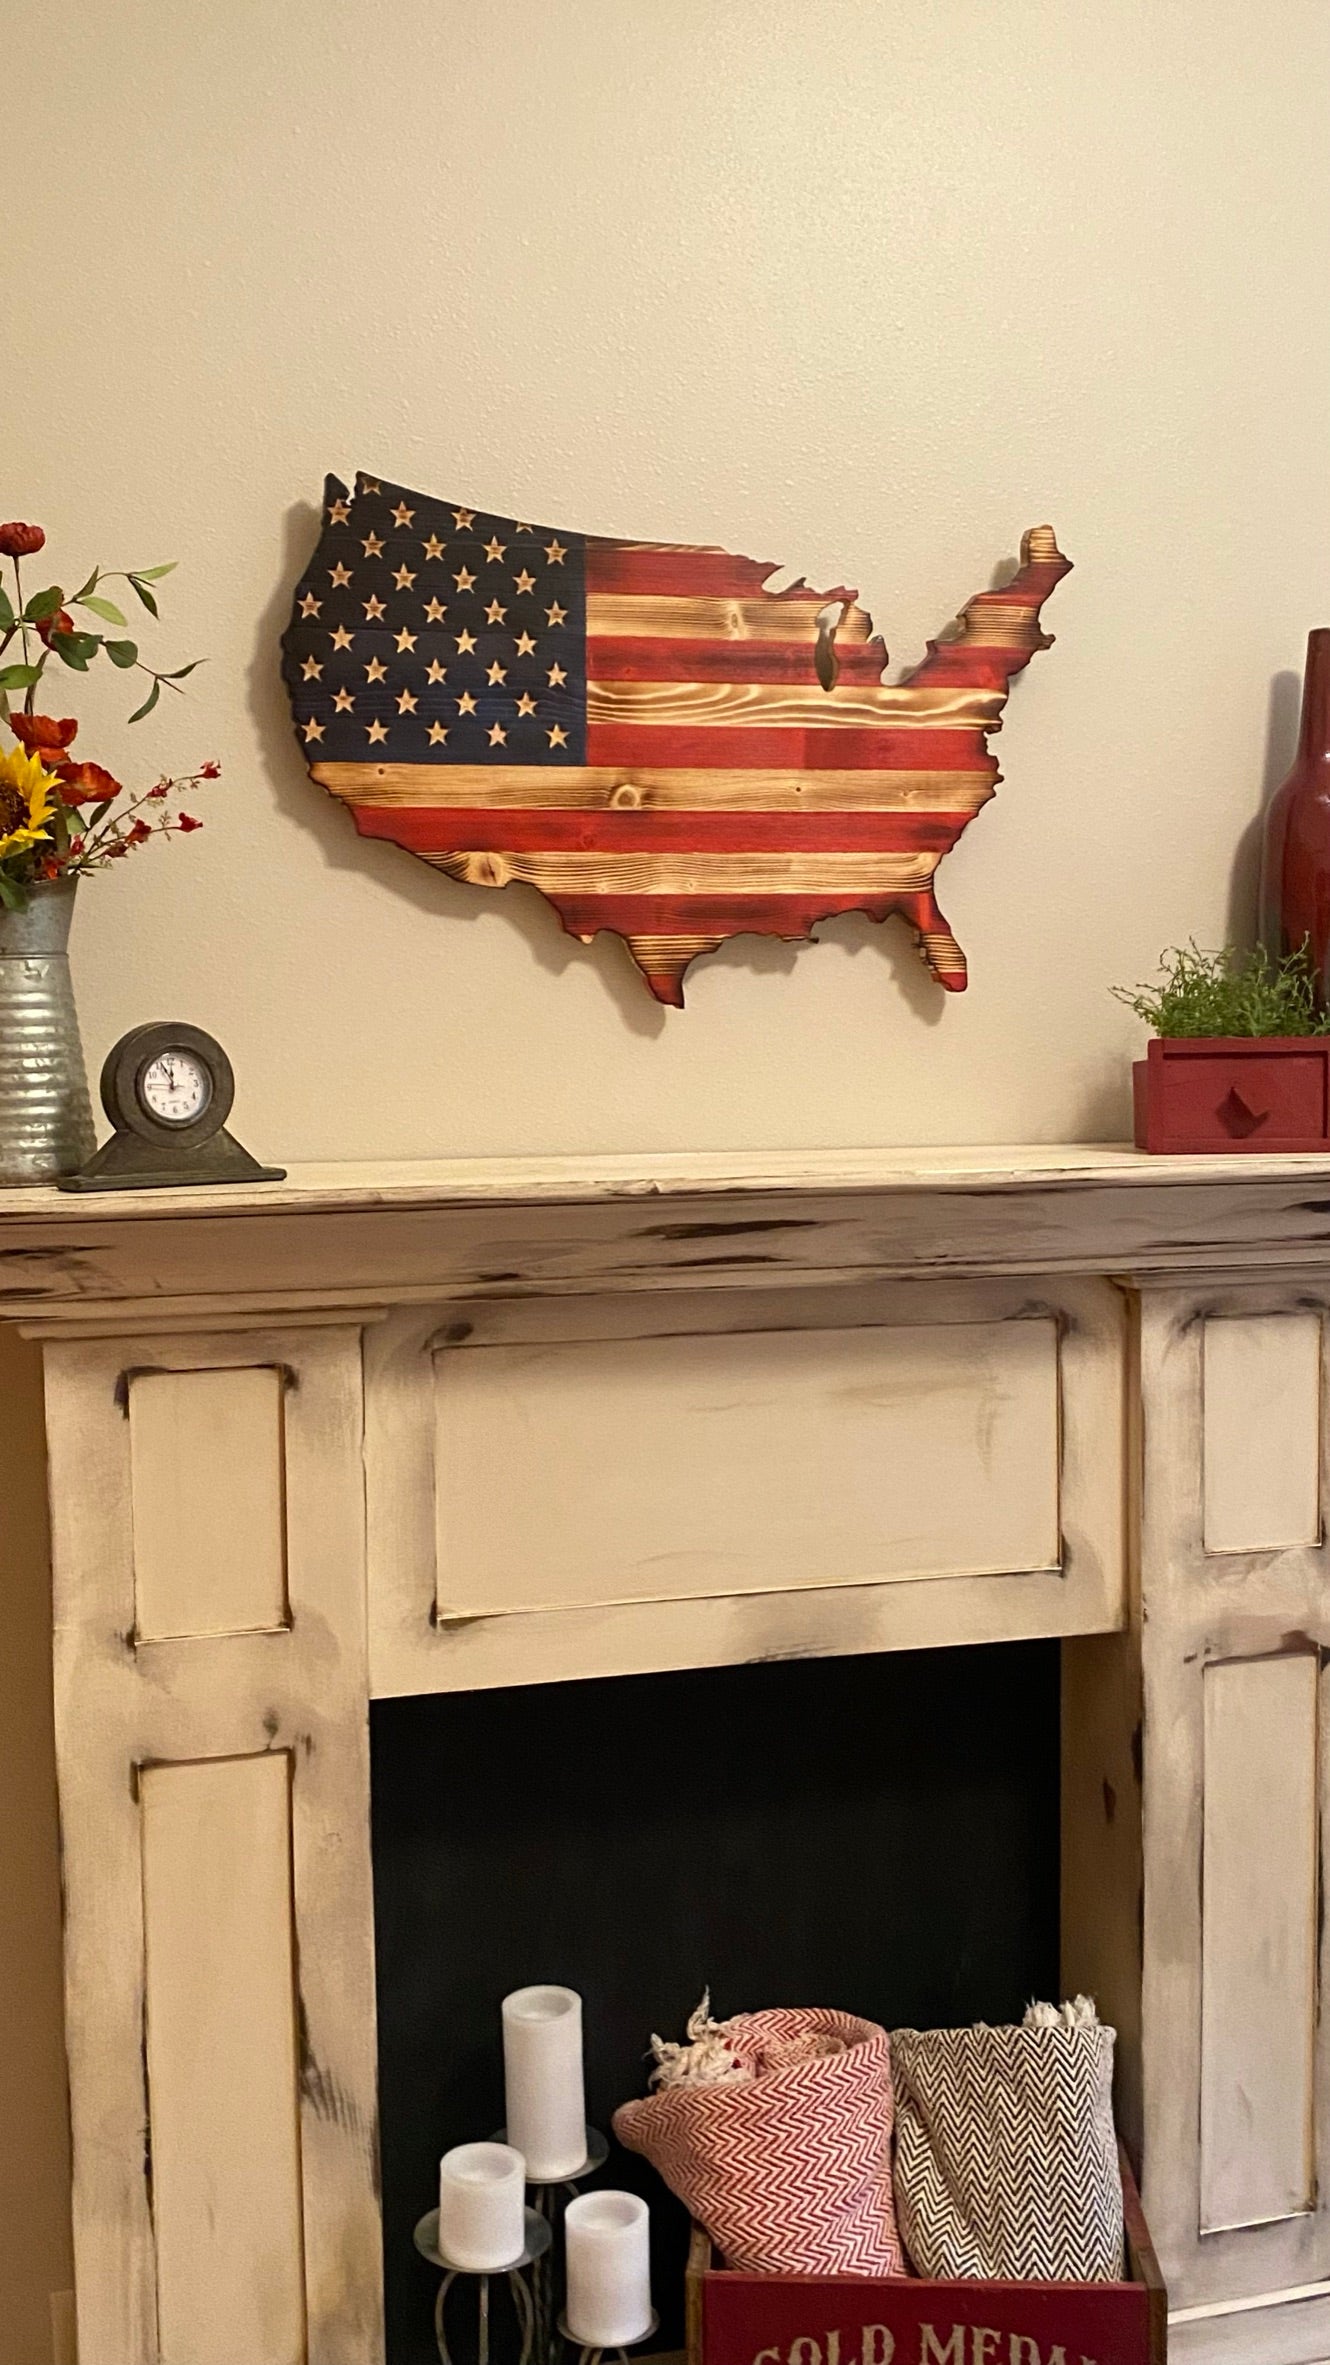 The Natural Wooden Continental Rustic USA flag